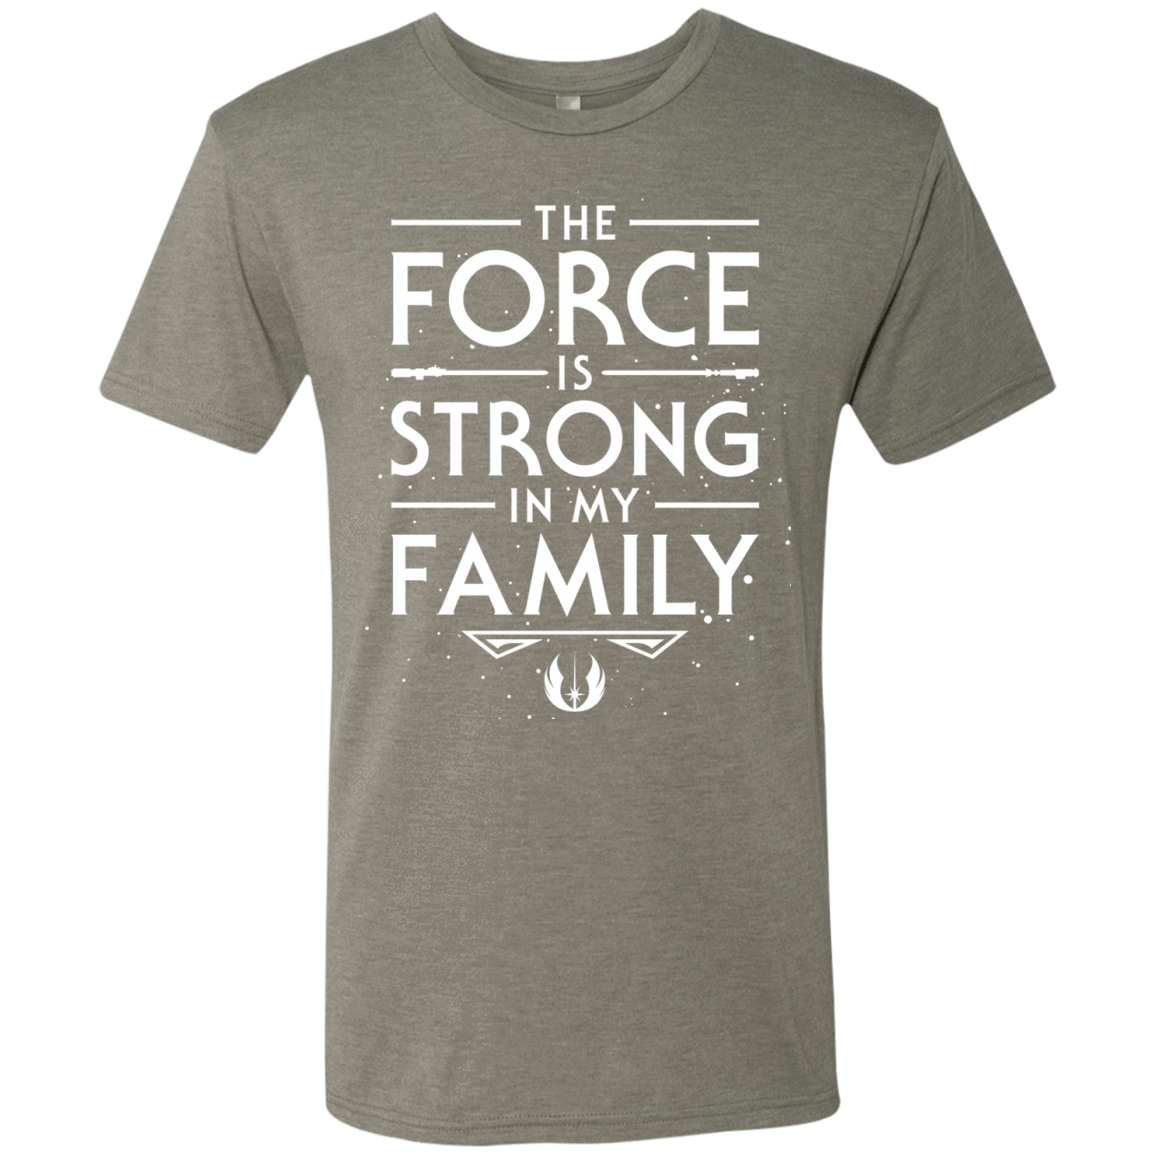 T-Shirts Venetian Grey / S The Force is Strong in my Family Men's Triblend T-Shirt